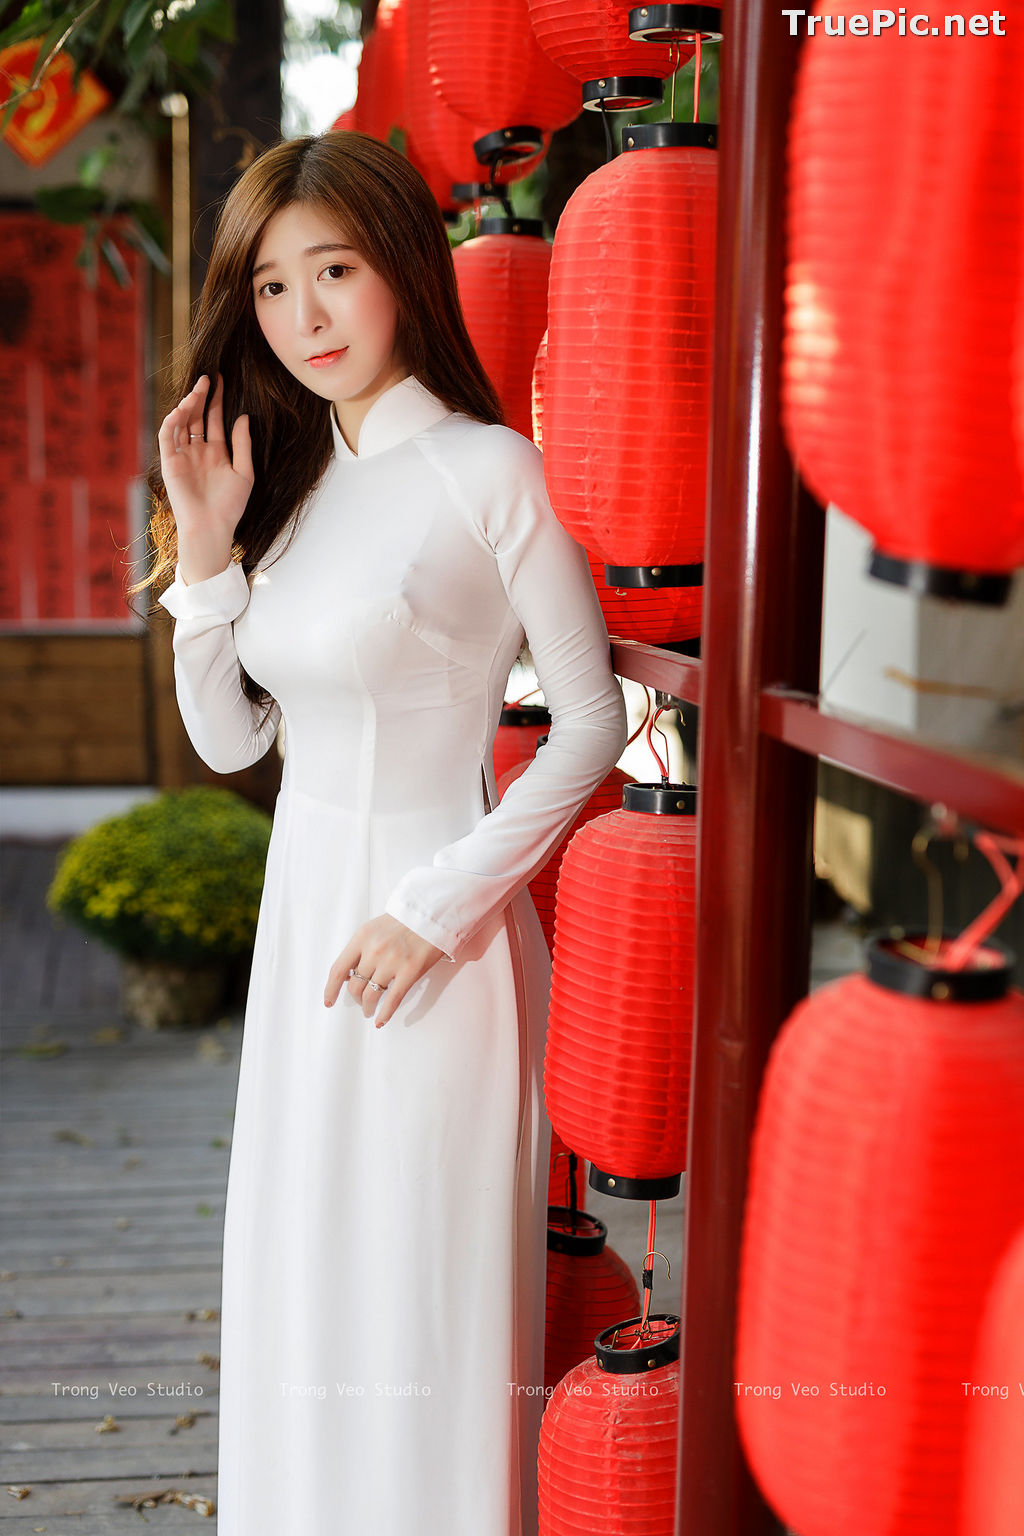 Image The Beauty of Vietnamese Girls with Traditional Dress (Ao Dai) #4 - TruePic.net - Picture-24